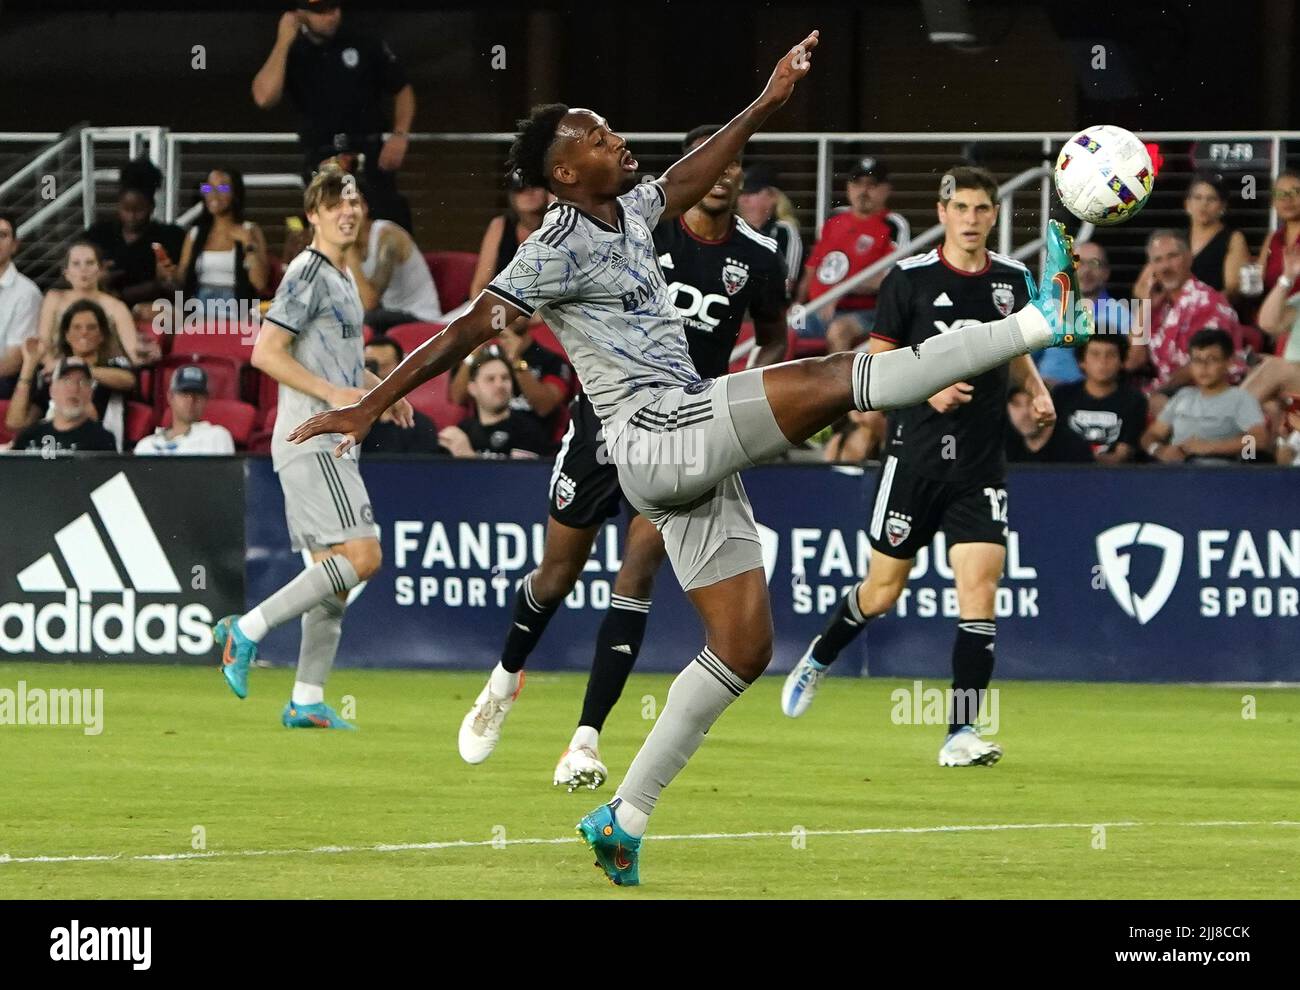 WASHINGTON, DC, USA - 23 JULY 2022: CF Montréal forward Mason Toye (13) pulls in a high ball during a MLS match between D.C United and C.F. Montreal, on July 23, 2022, at Audi Field, in Washington, DC. (Photo by Tony Quinn-Alamy Live News) Stock Photo